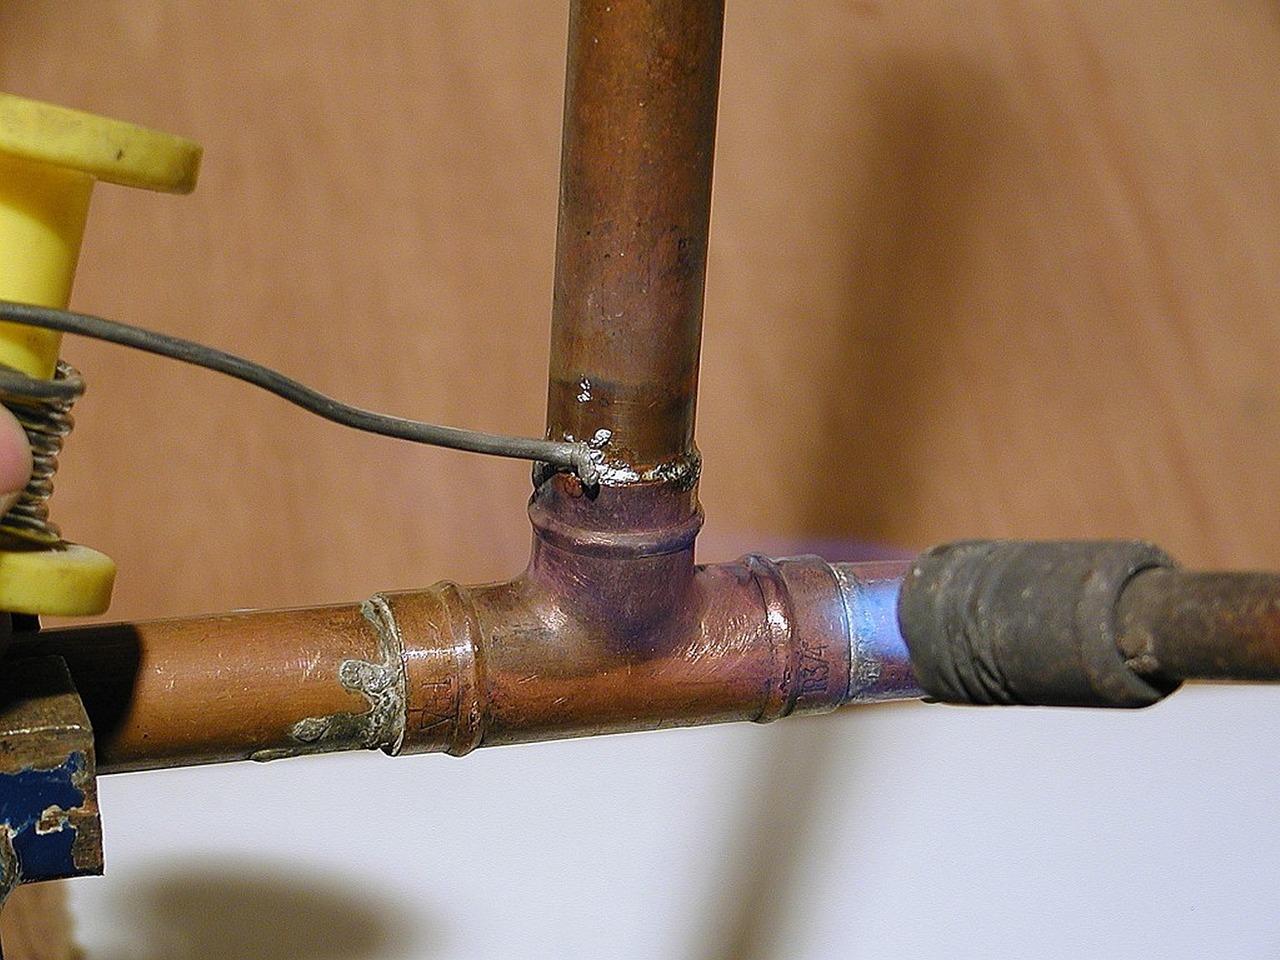  How To Connect Pex To Copper Without Soldering 